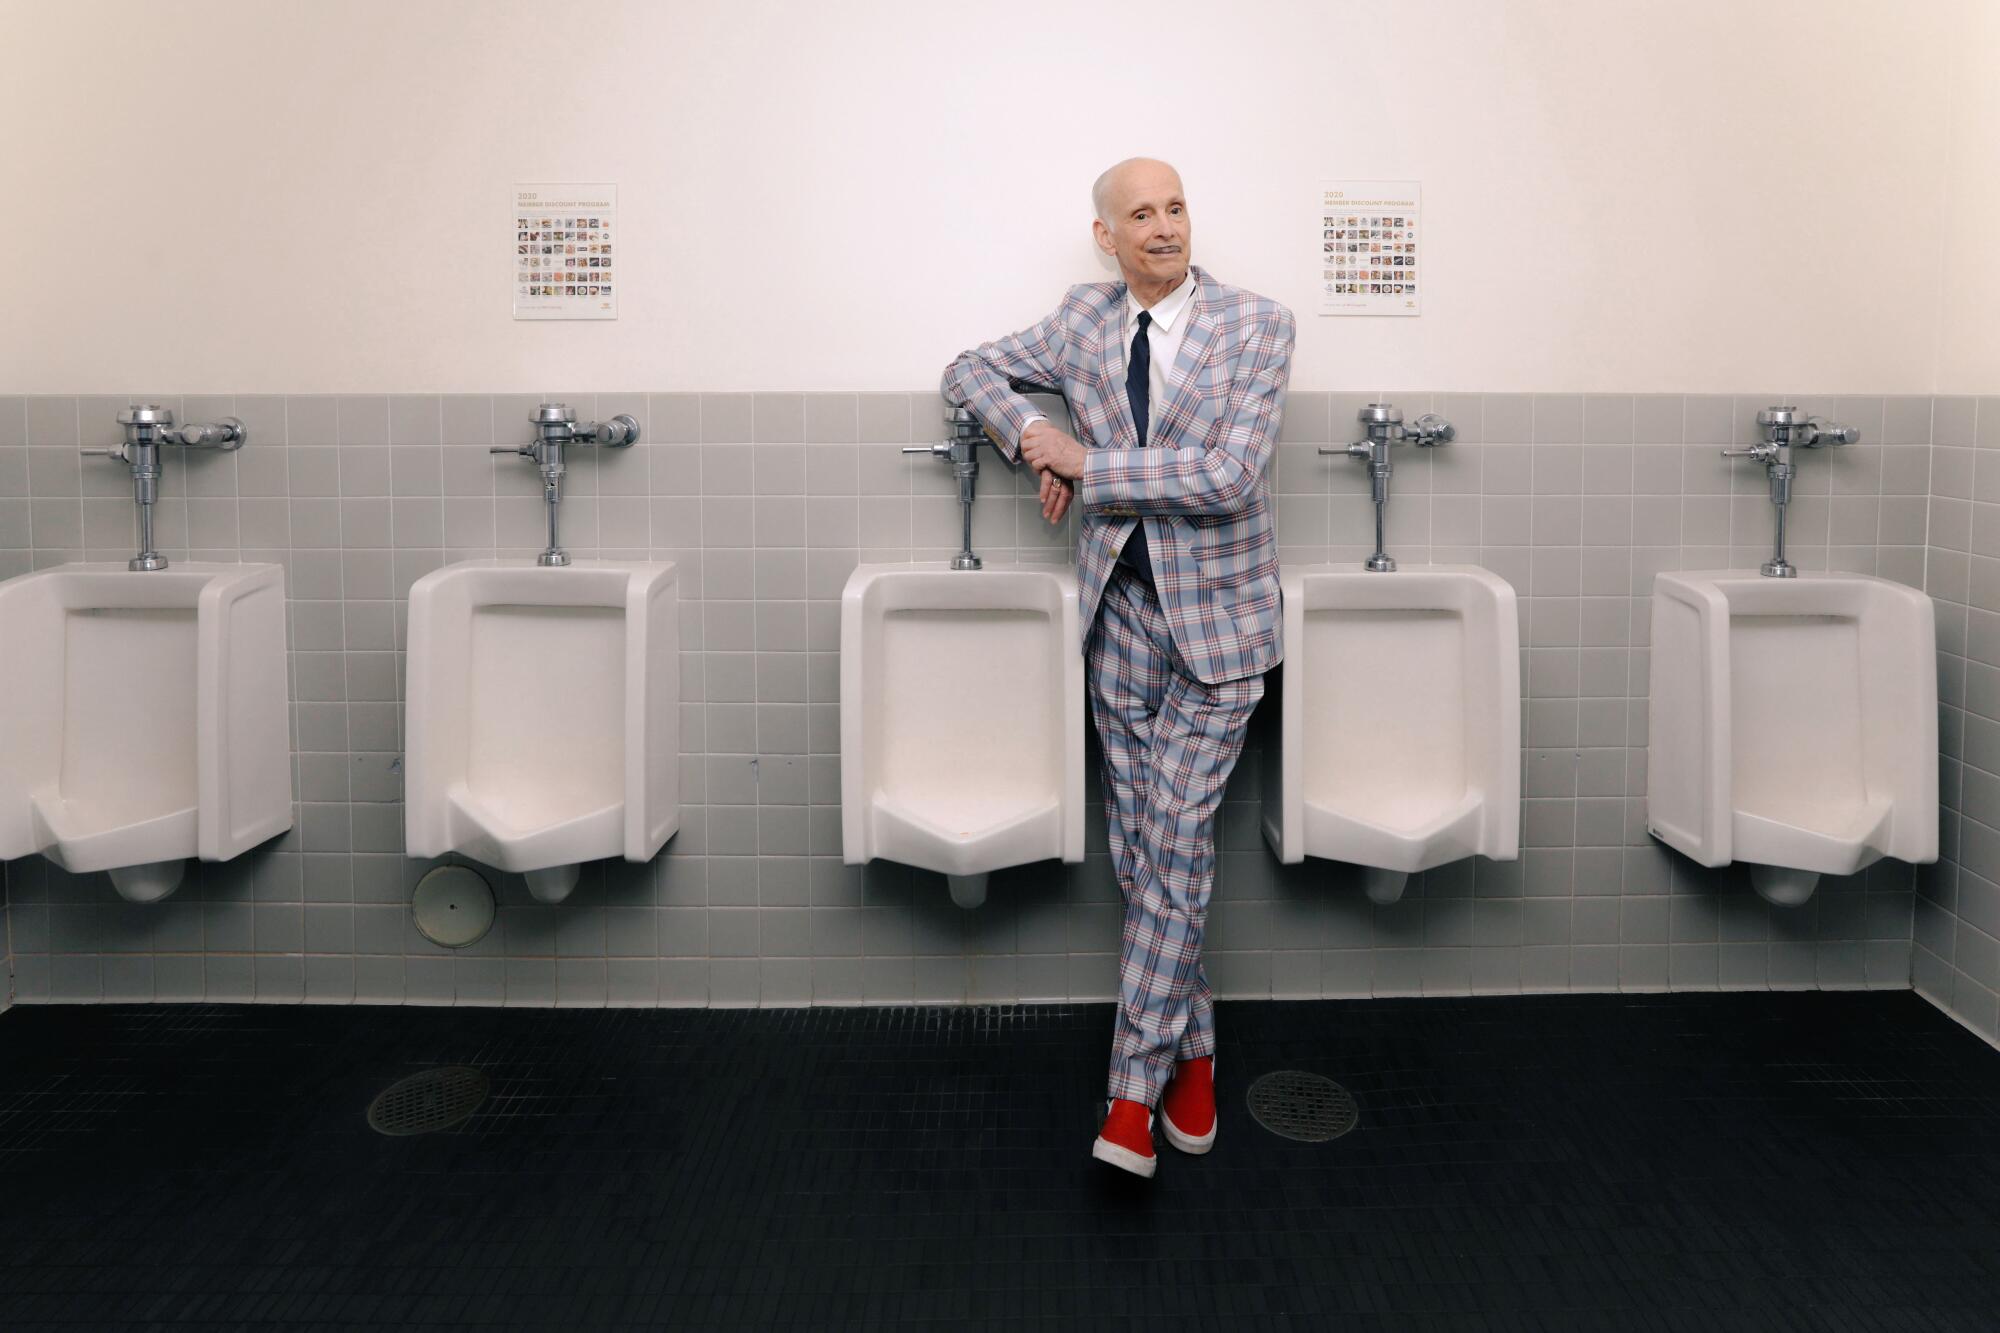 A man in a plaid suit stands near urinals in a men's bathroom